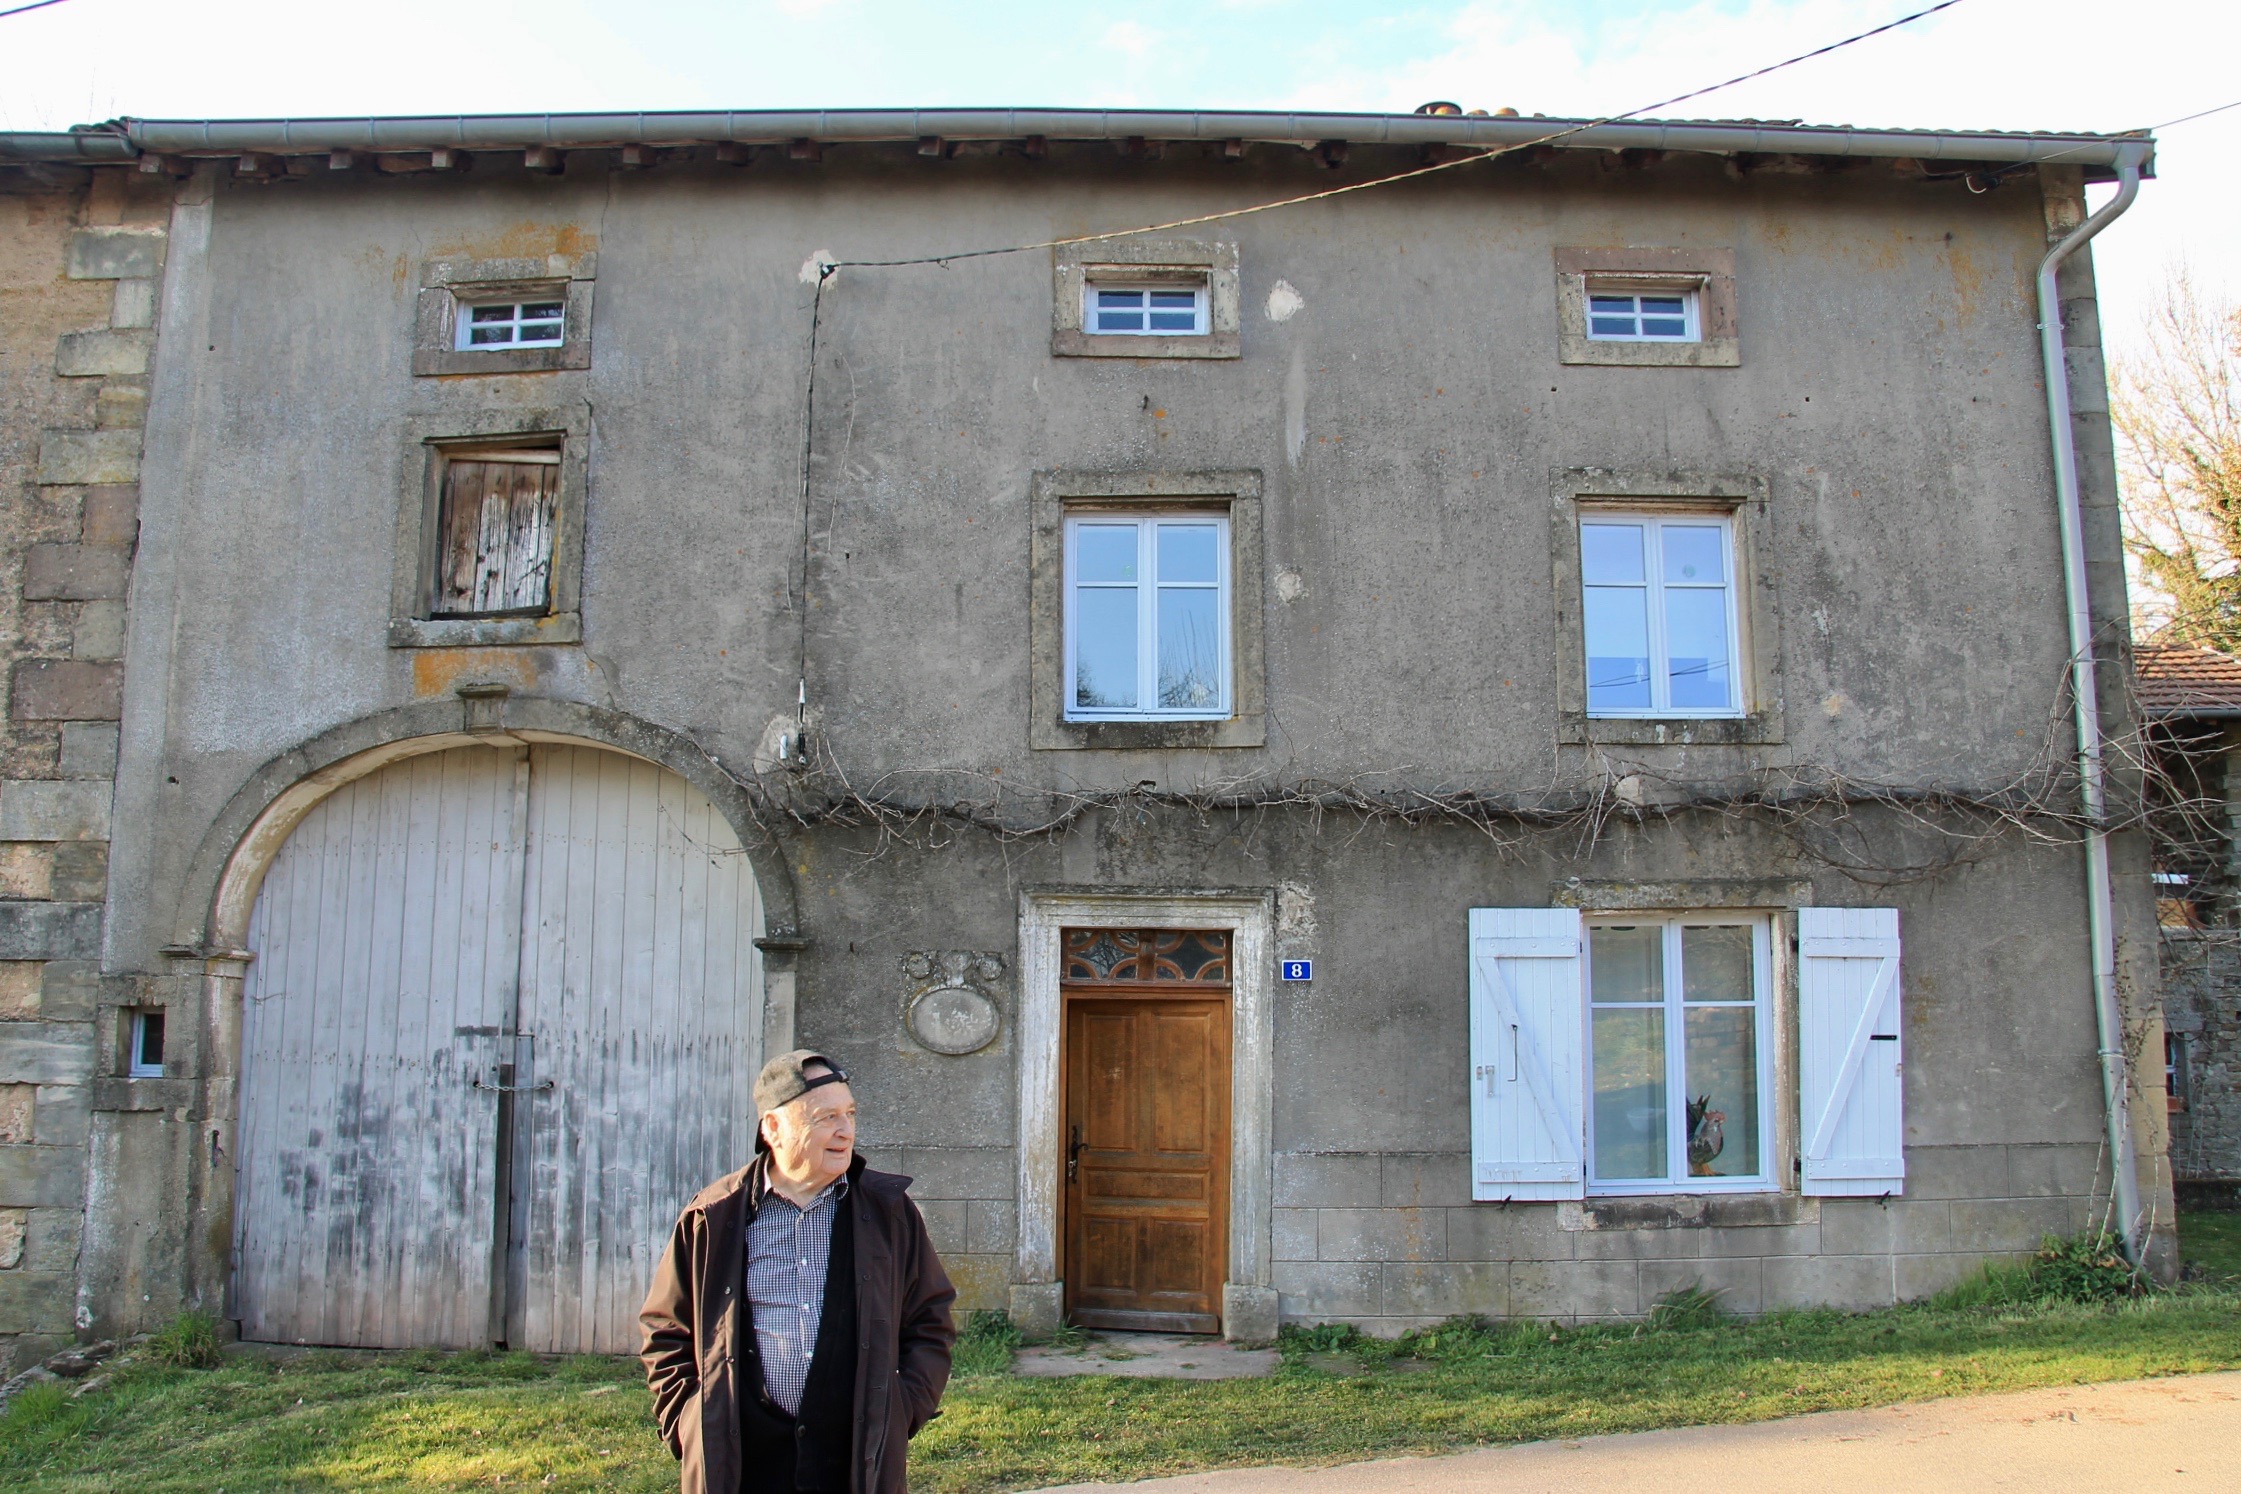 BLANK in front of his home in Agemont. (Agathe Muller, 14 East)